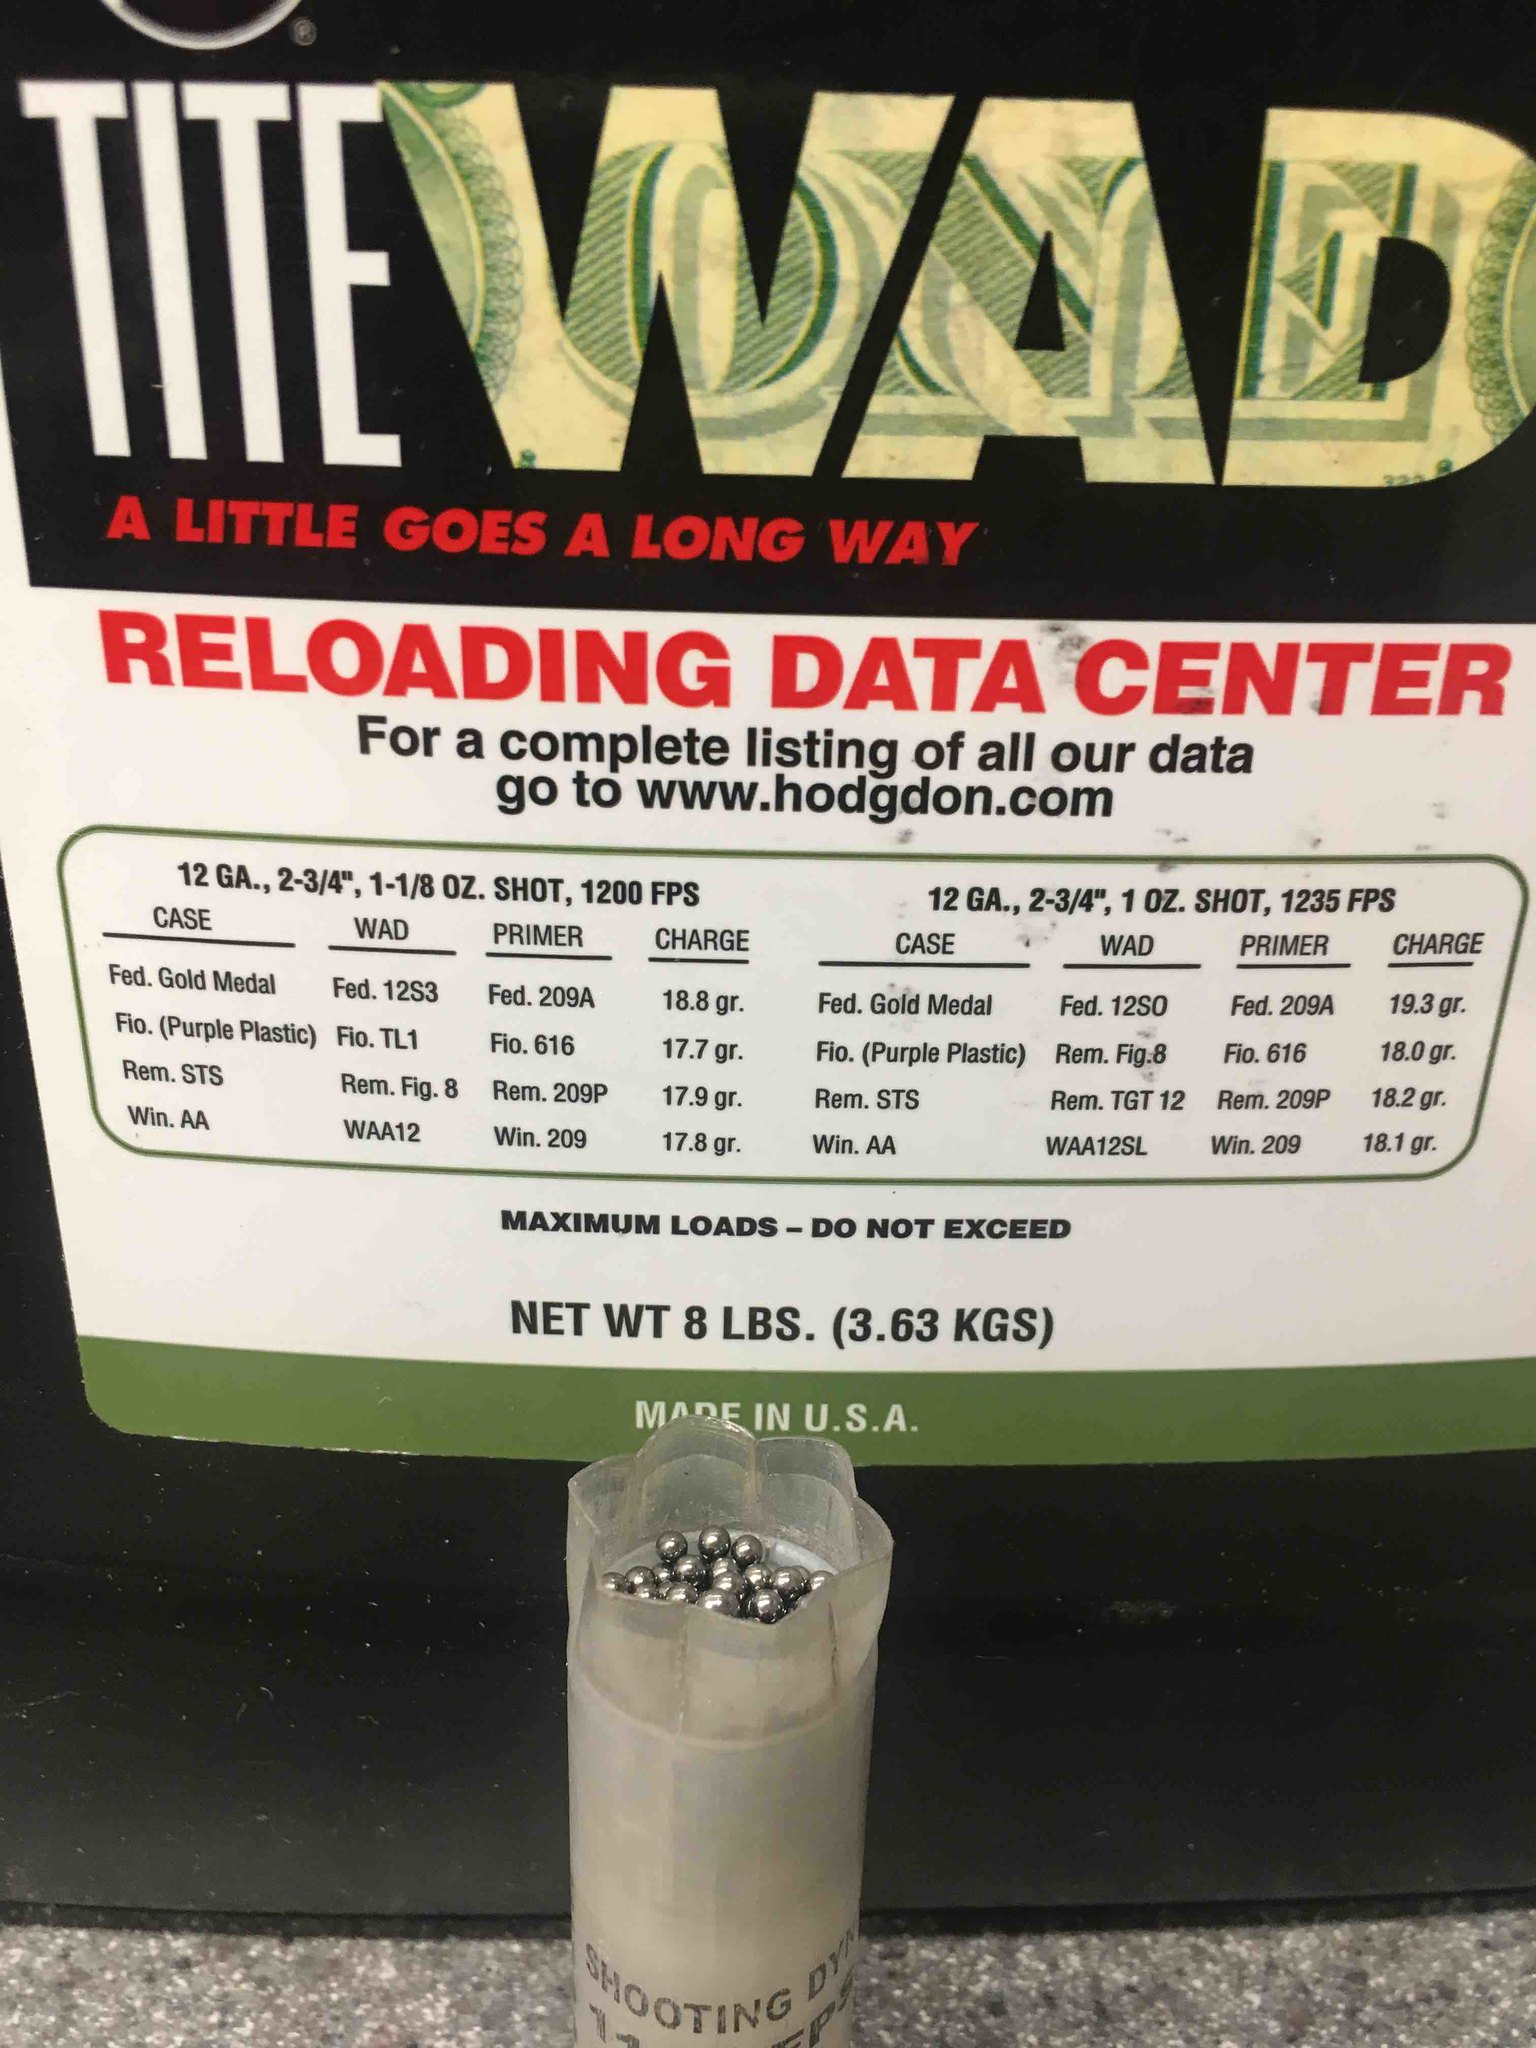 Breaking my own rules: using TiteWad for 7/8th's ounce | Shotgun Forum